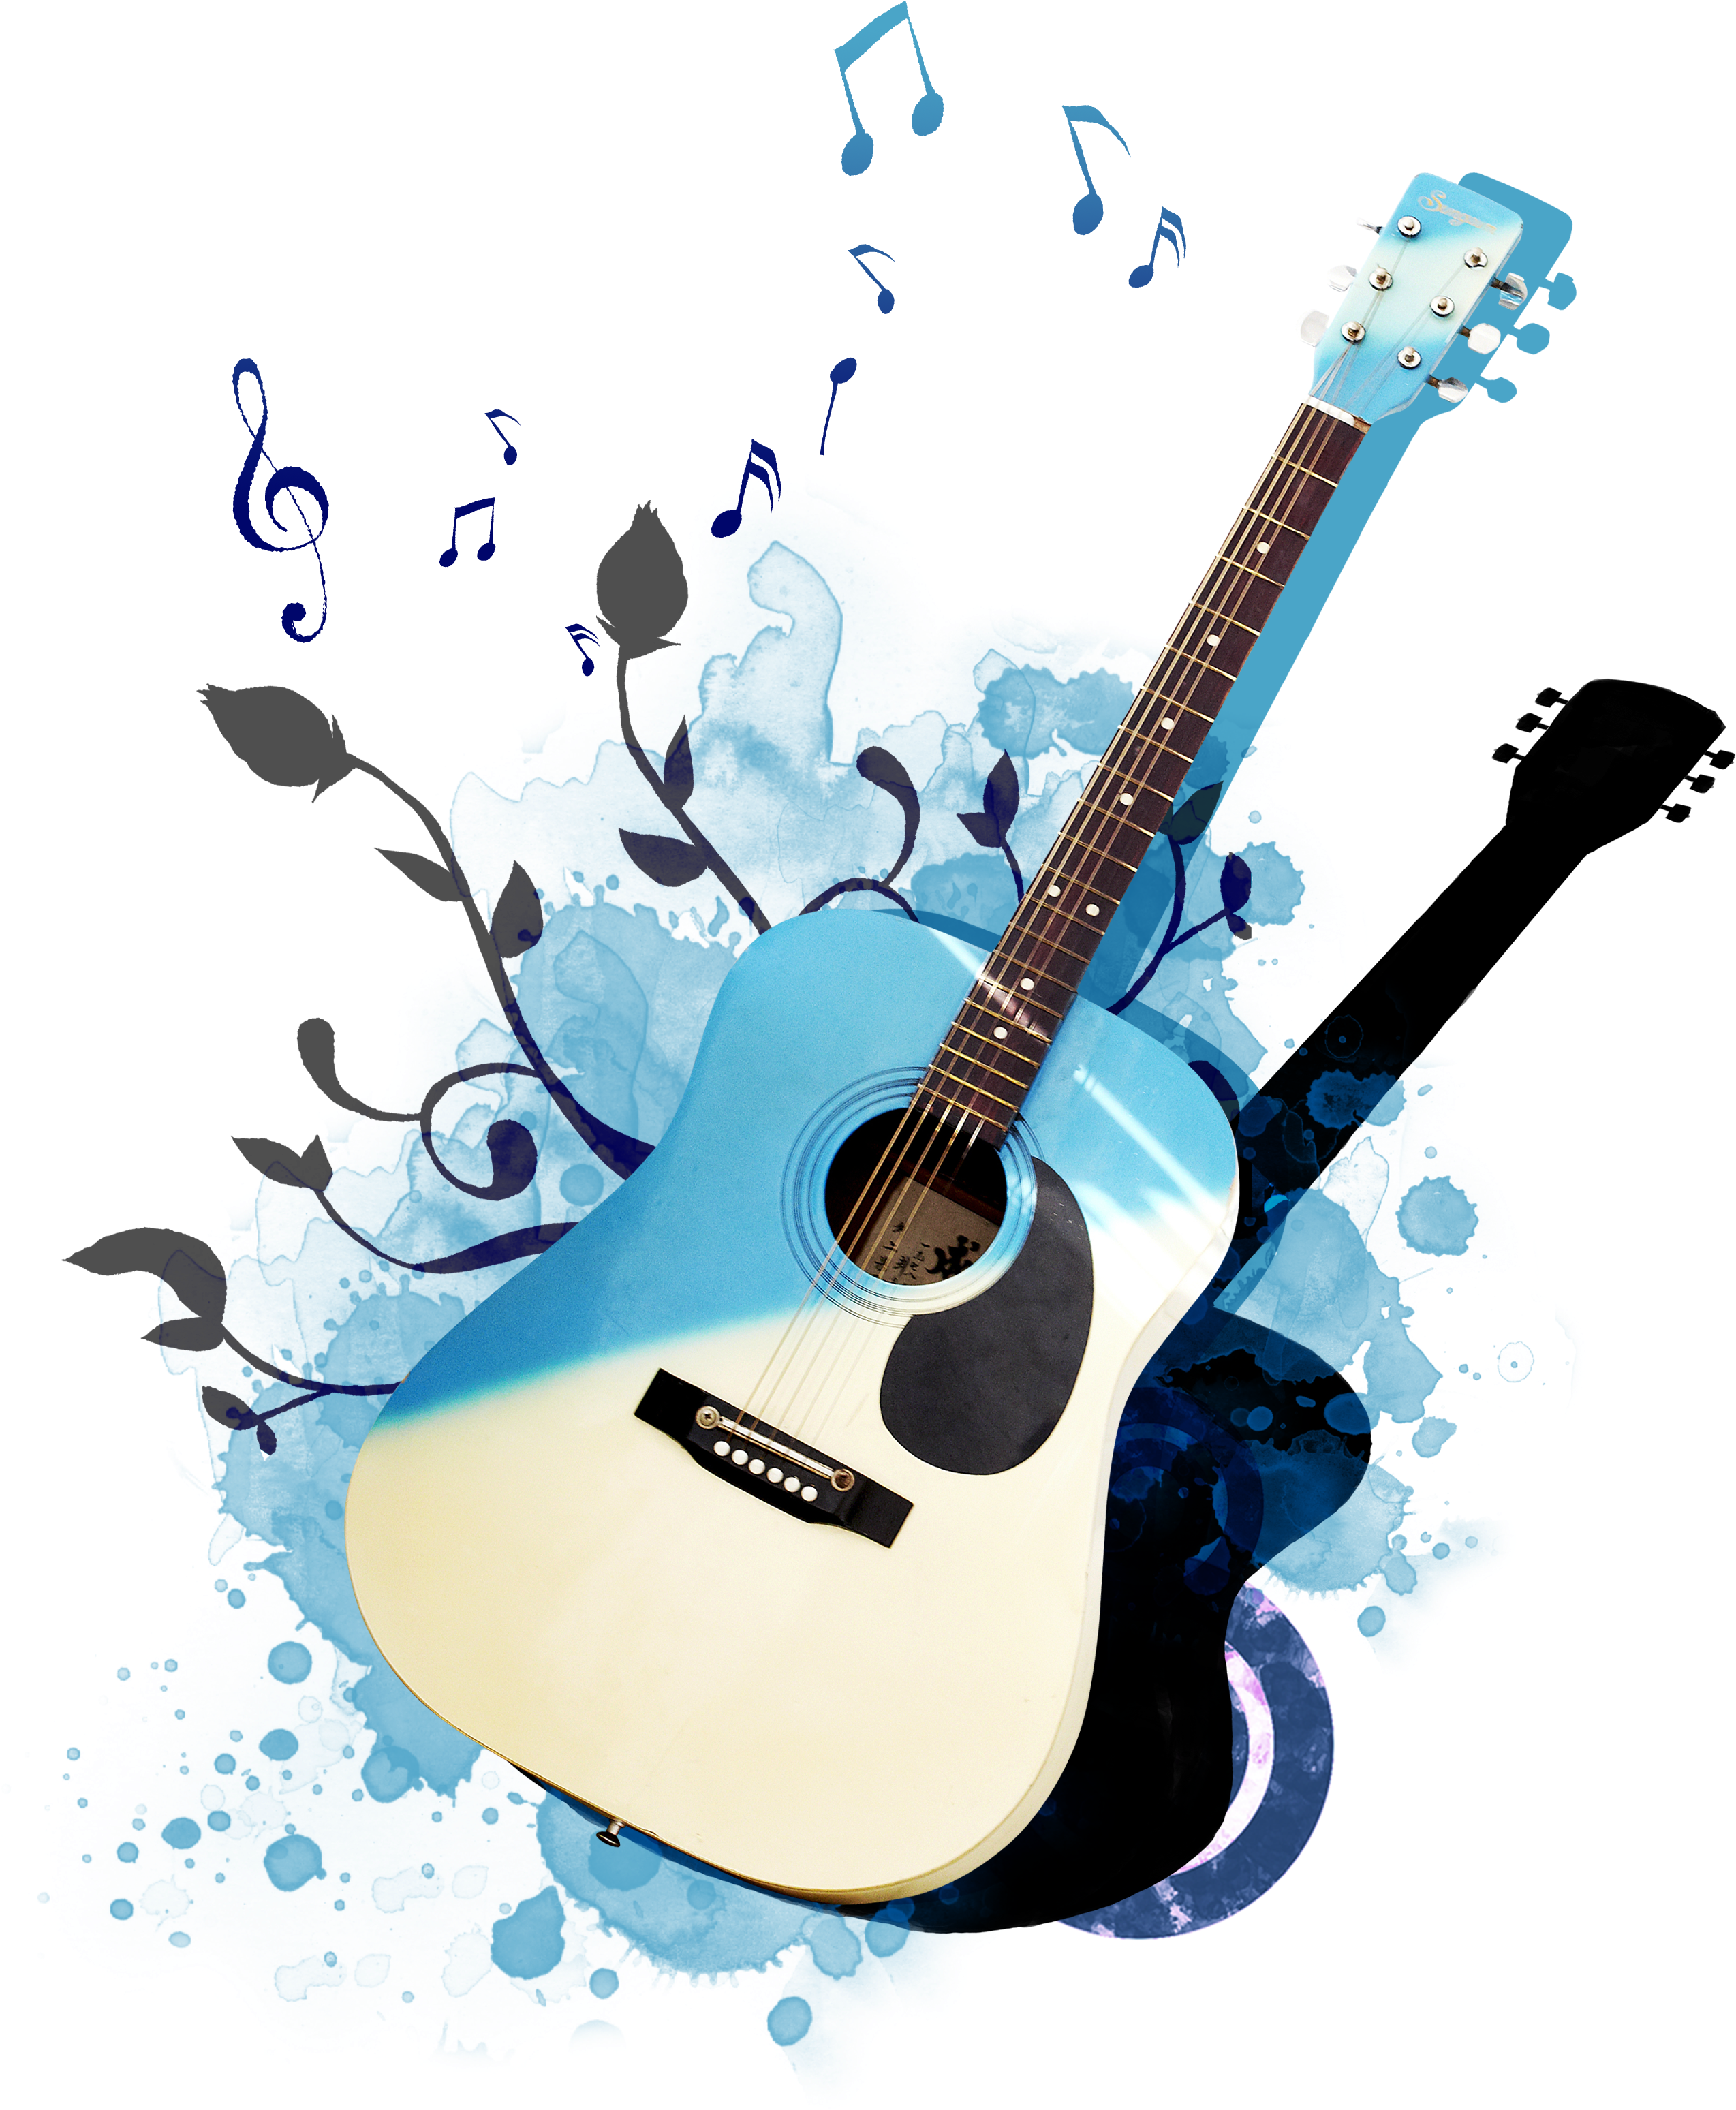 Guitar Poster Psd Png Download Free Clipart.